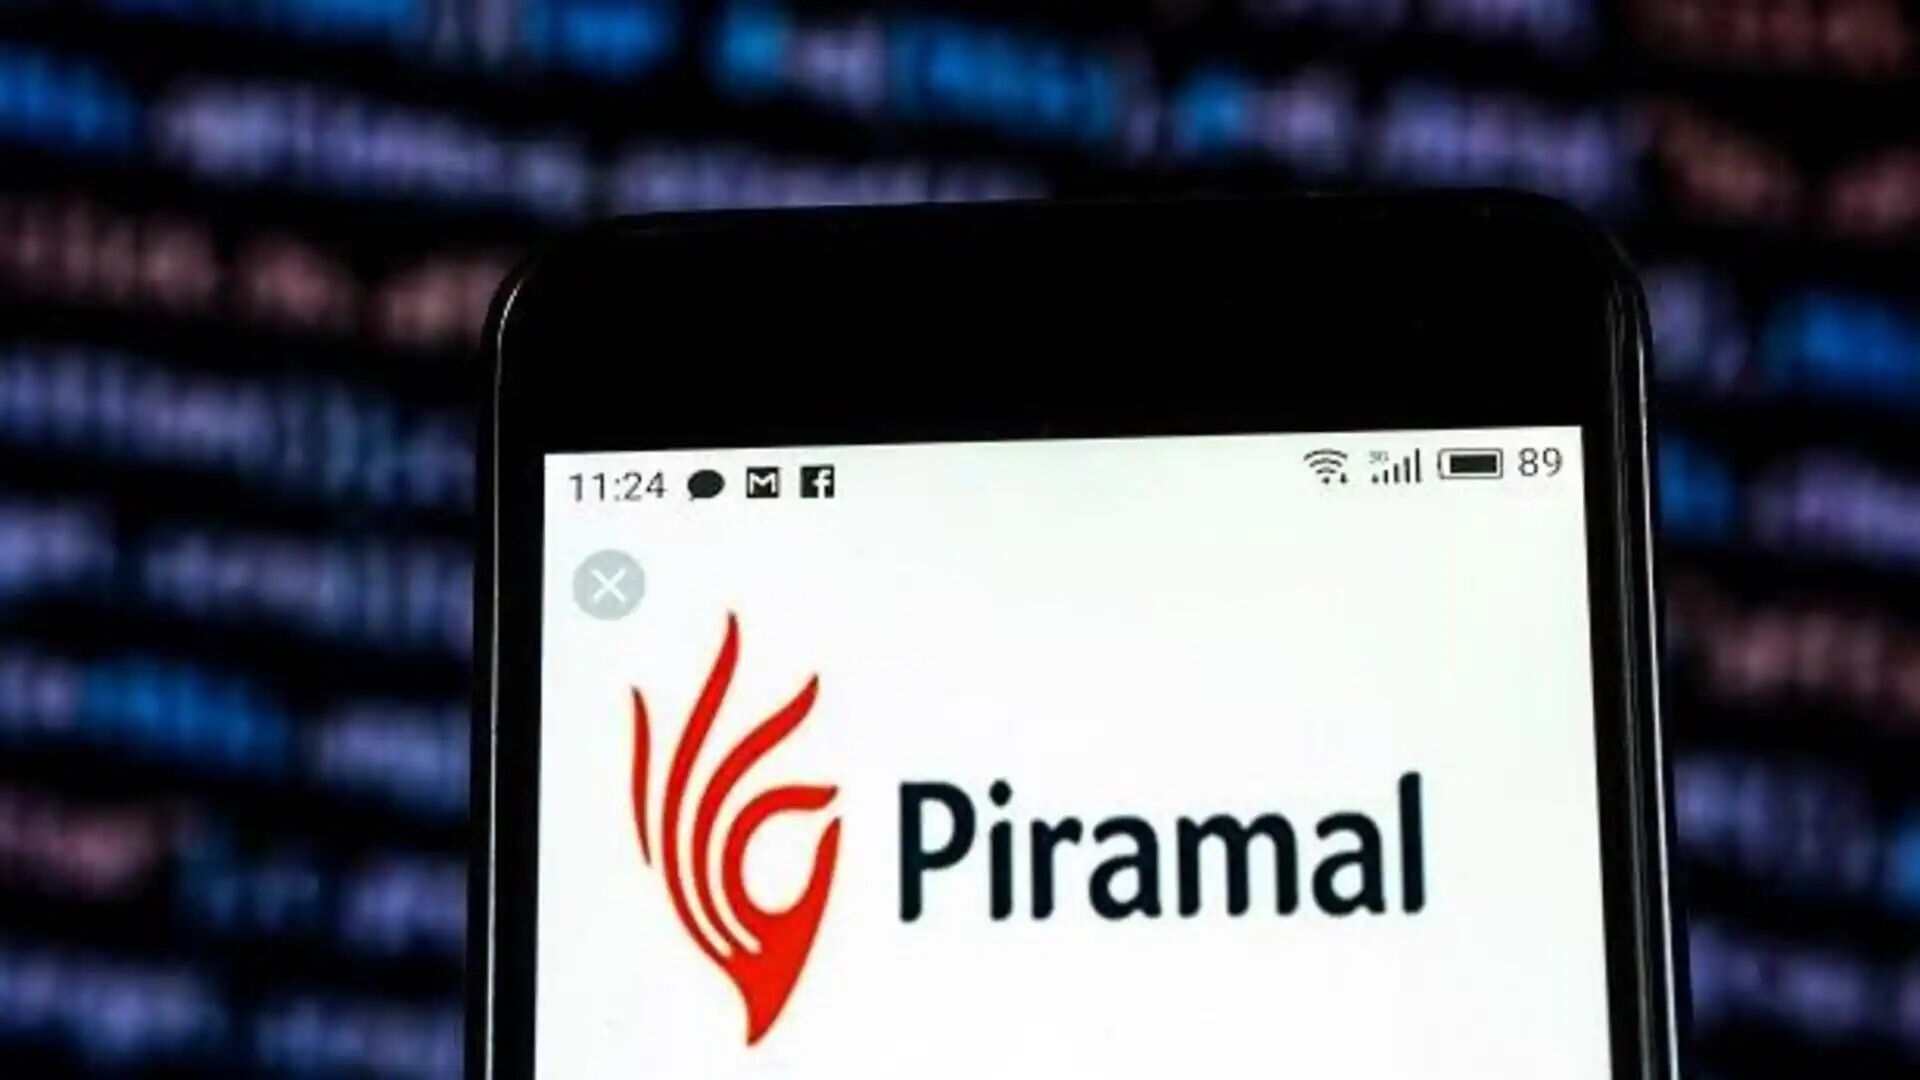 Piramal Group Data Leaked? Hacker Claims Stealing Of Company’s Employee Data